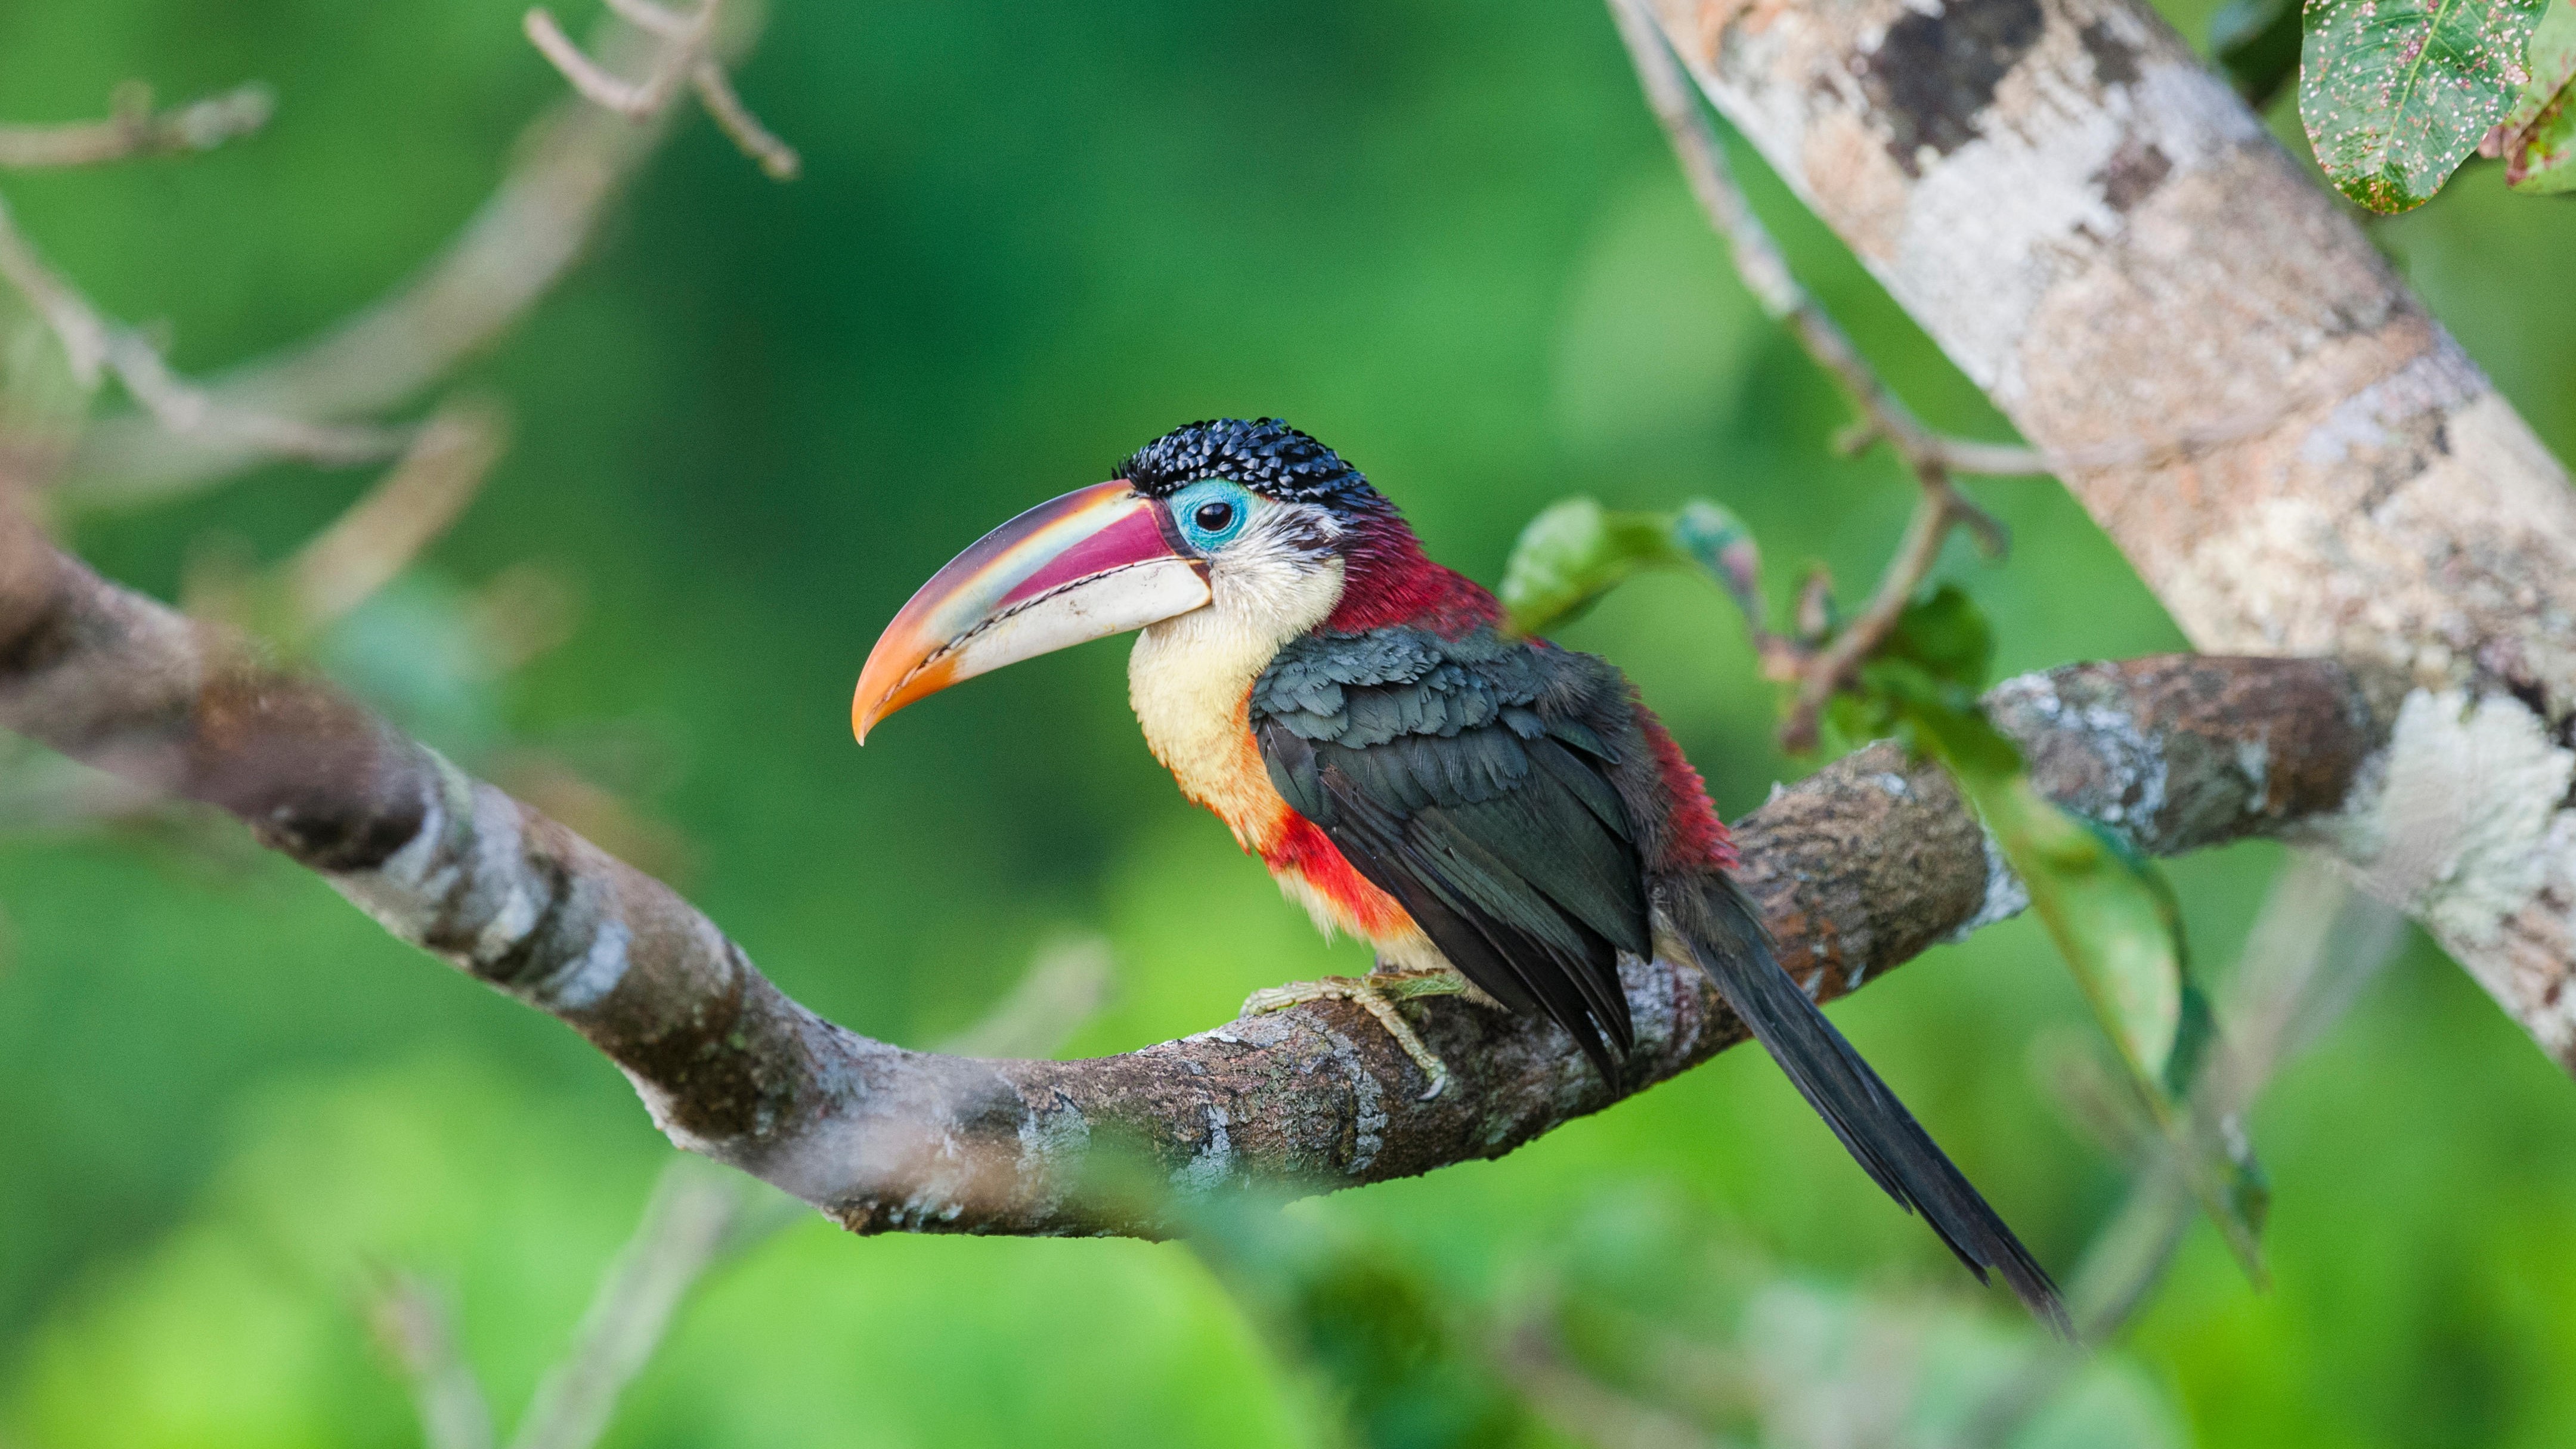 A curl-crested aracari sitting on a branch on a blurry green forest background.